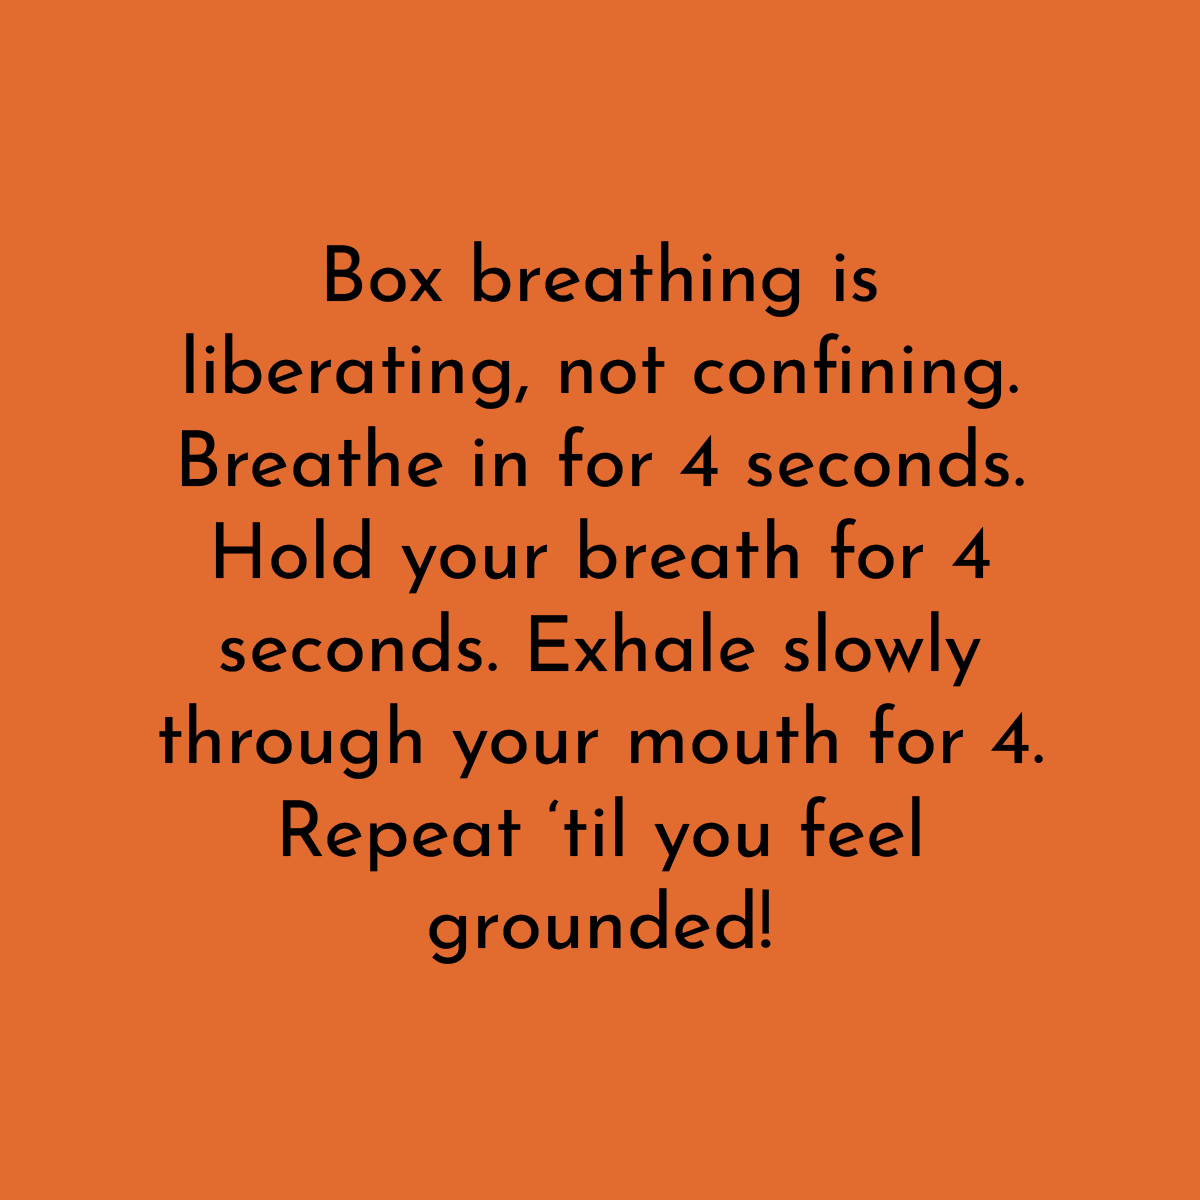 Box breathing is liberating, not confining. Breathe in for 4 seconds. Hold your breath for 4 seconds. Exhale slowly through your mouth for 4. Repeat 'til you feel grounded!